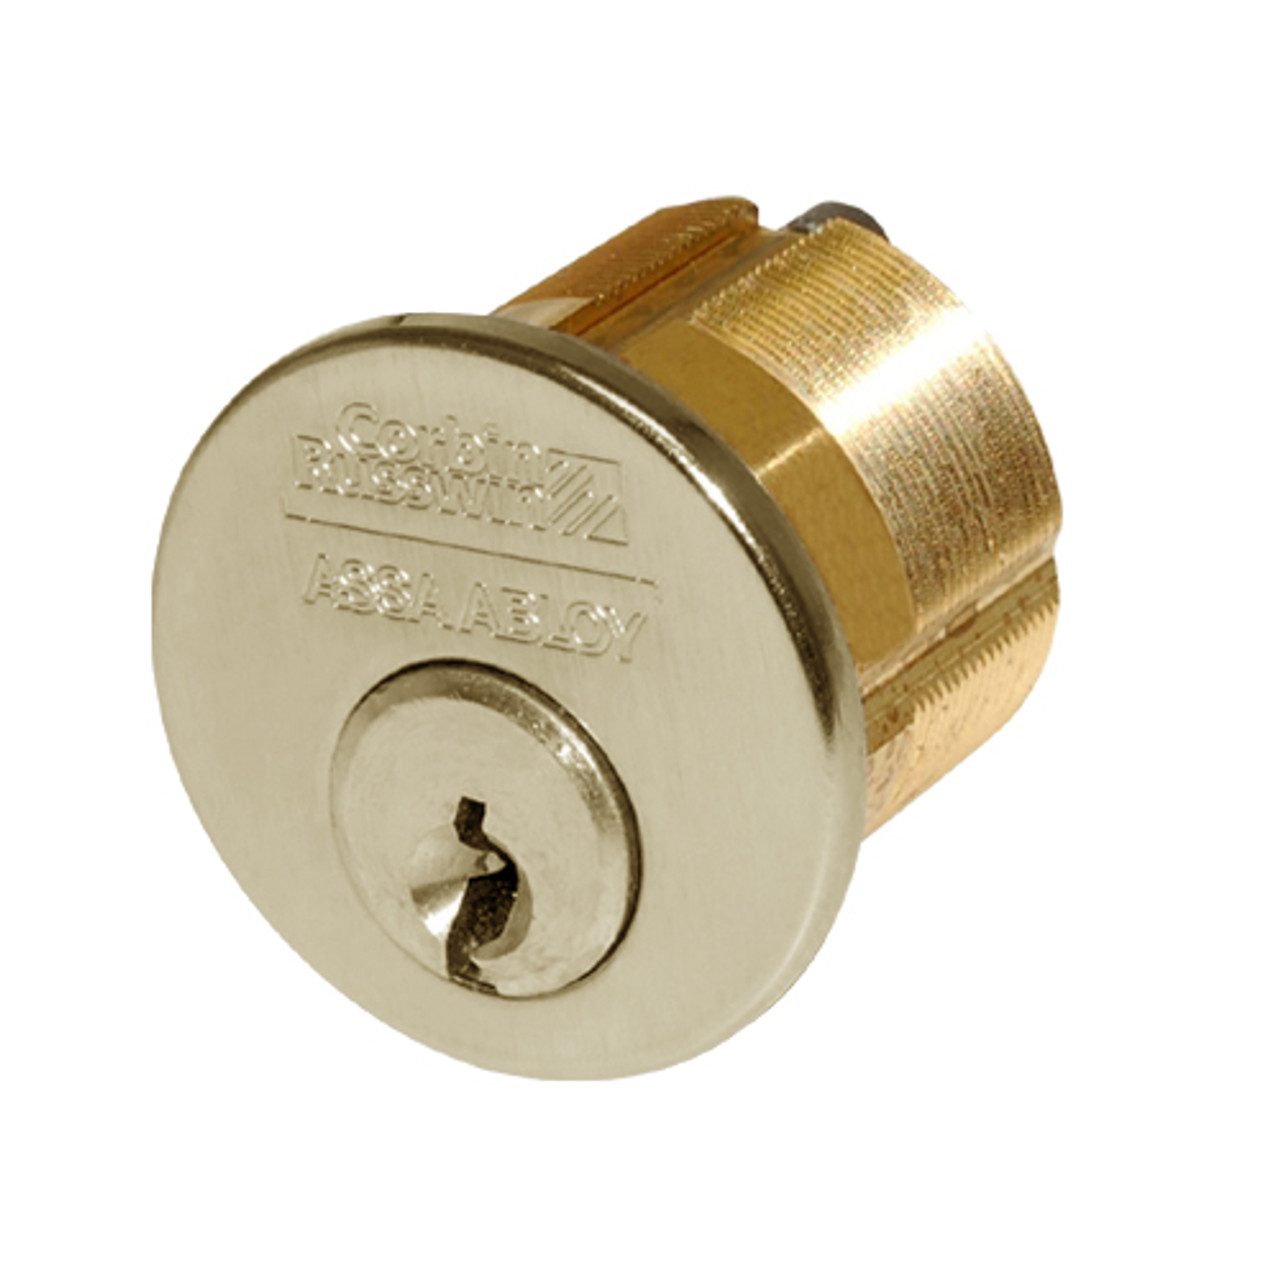 CR1000-138-A06-6-D3-606 Corbin Conventional Mortise Cylinder for Mortise Lock and DL3000 Deadlocks with Schlage L9000 Cam in Satin Brass Finish